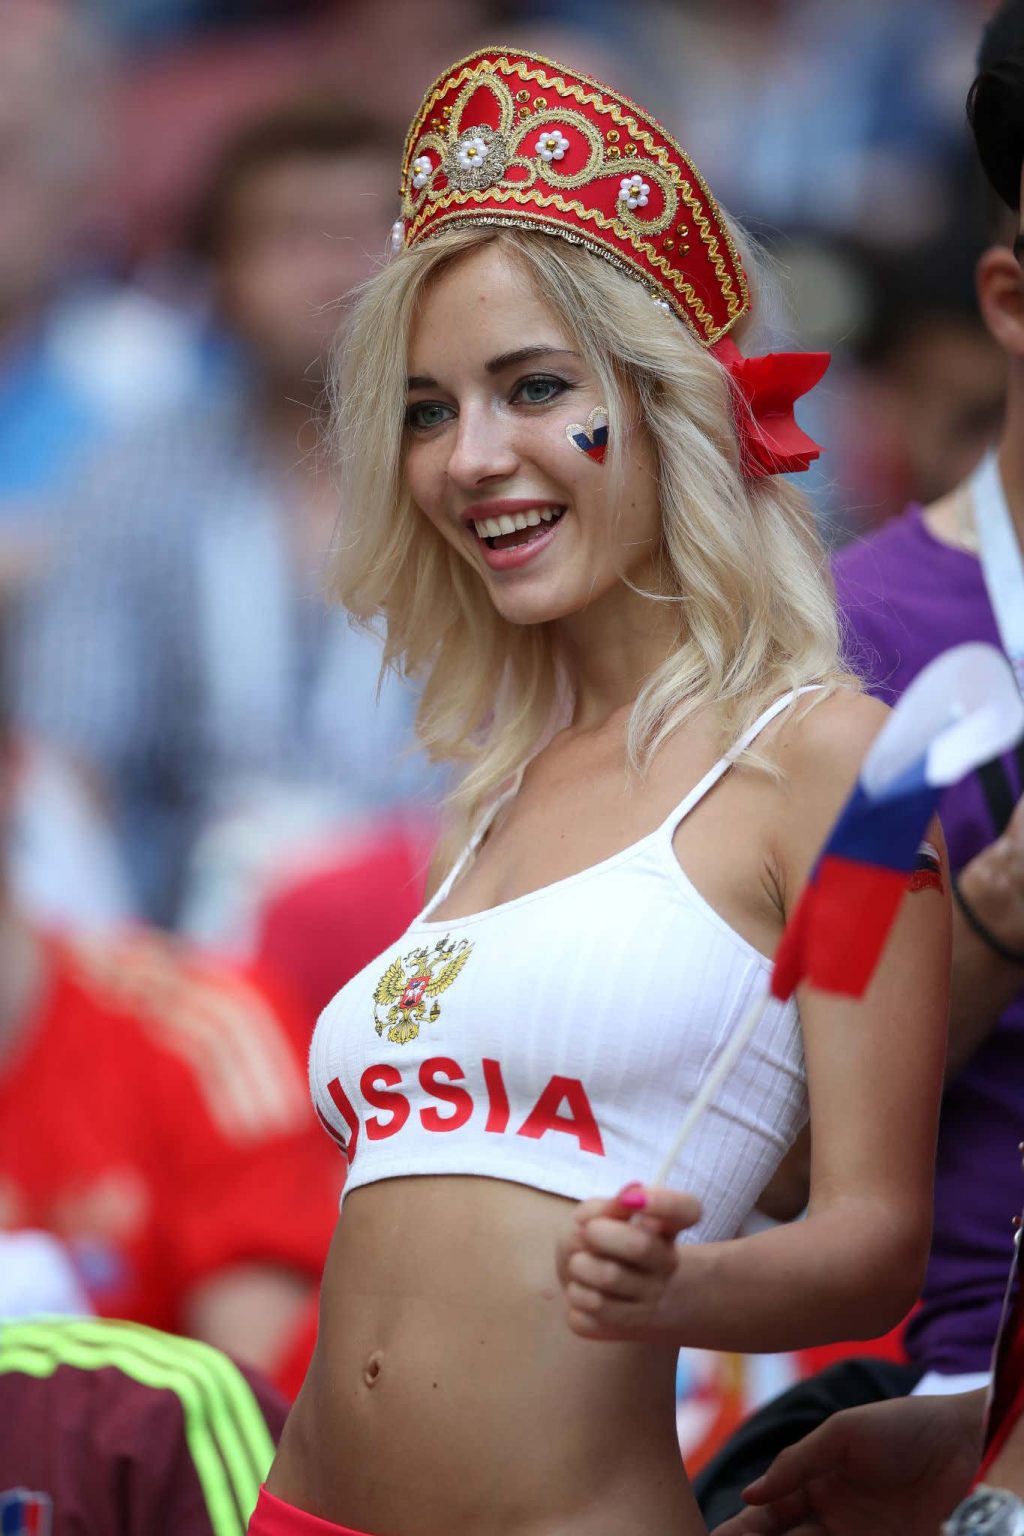 Russia S Manager Has Banned Beautiful Girls From Entering Euro 2020